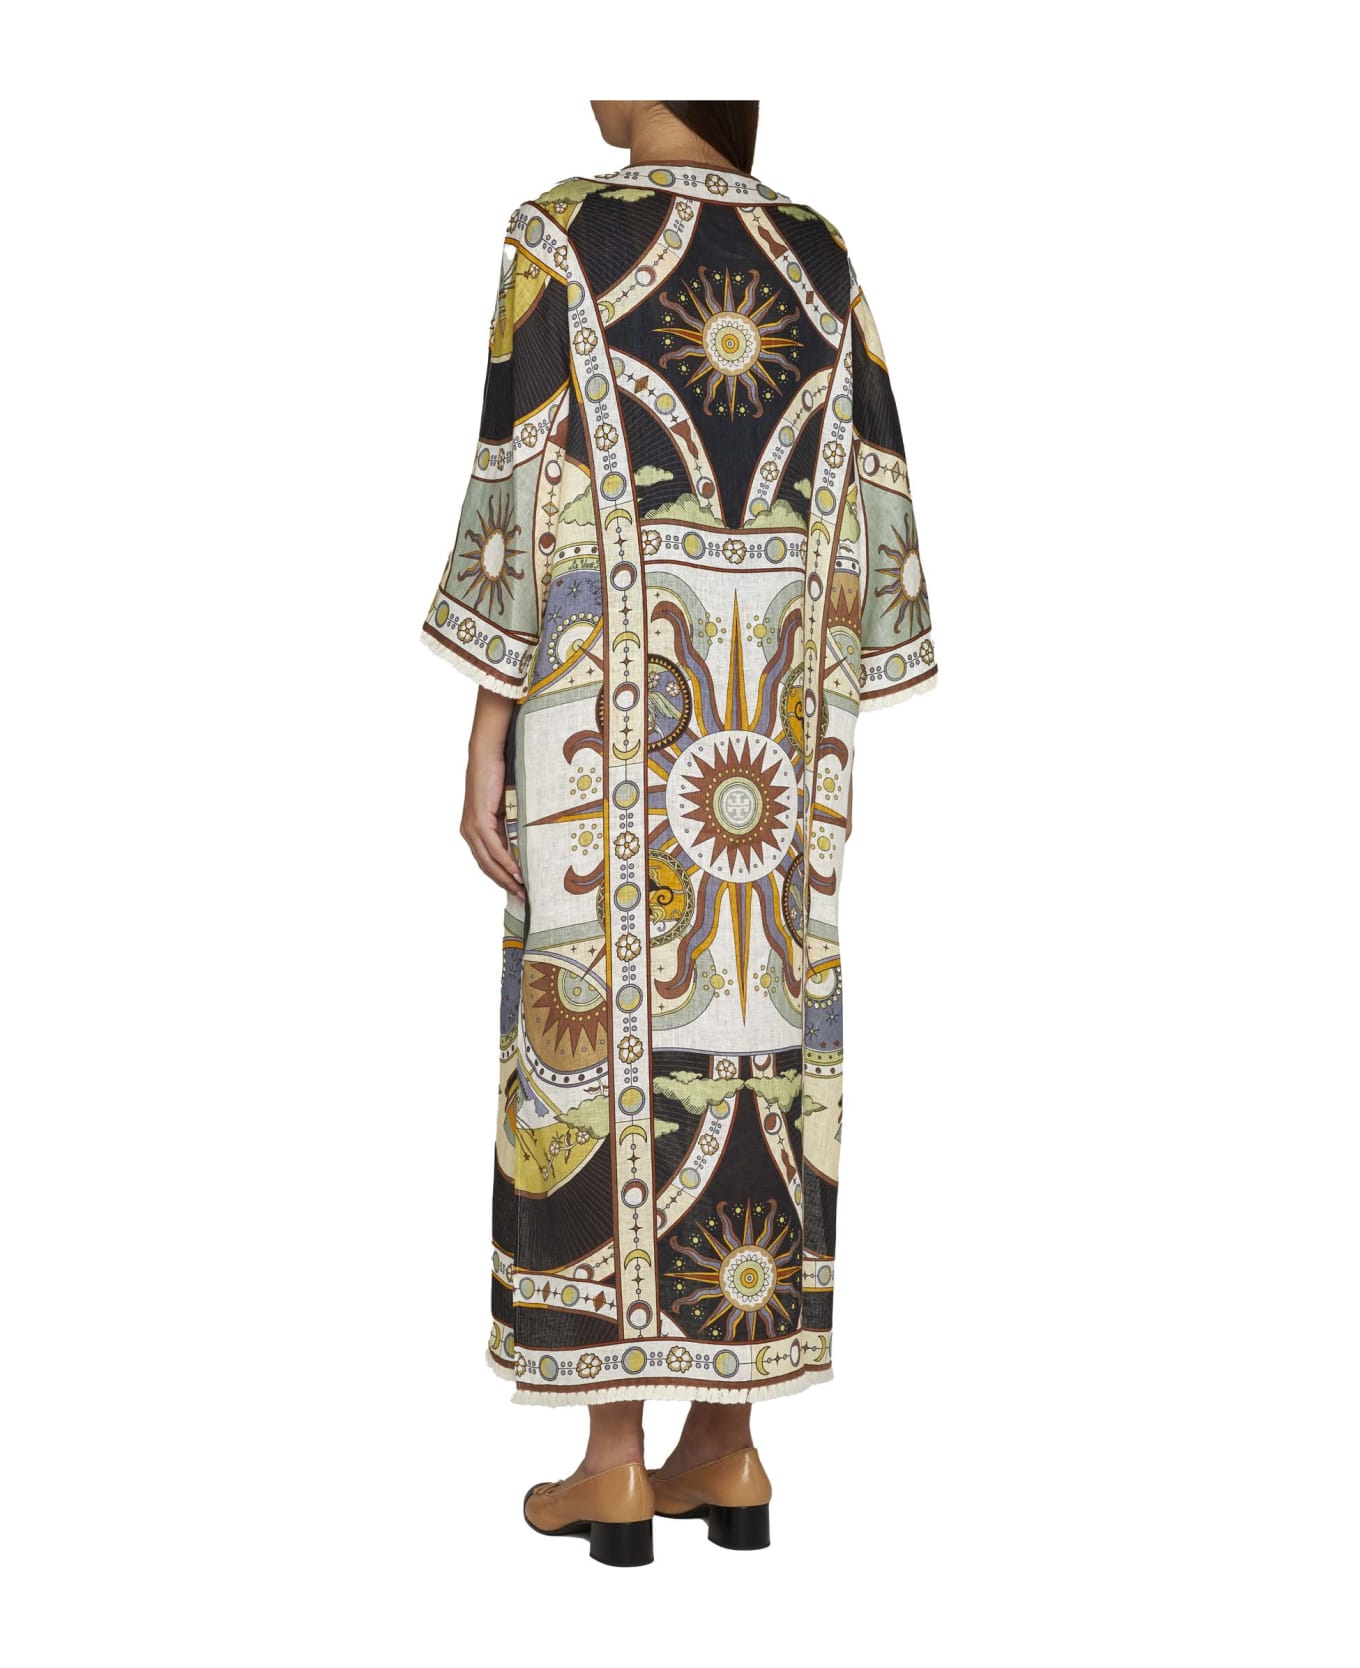 Tory Burch Kaftan With All-over Graphic Print In Linen - Navy sundial ワンピース＆ドレス